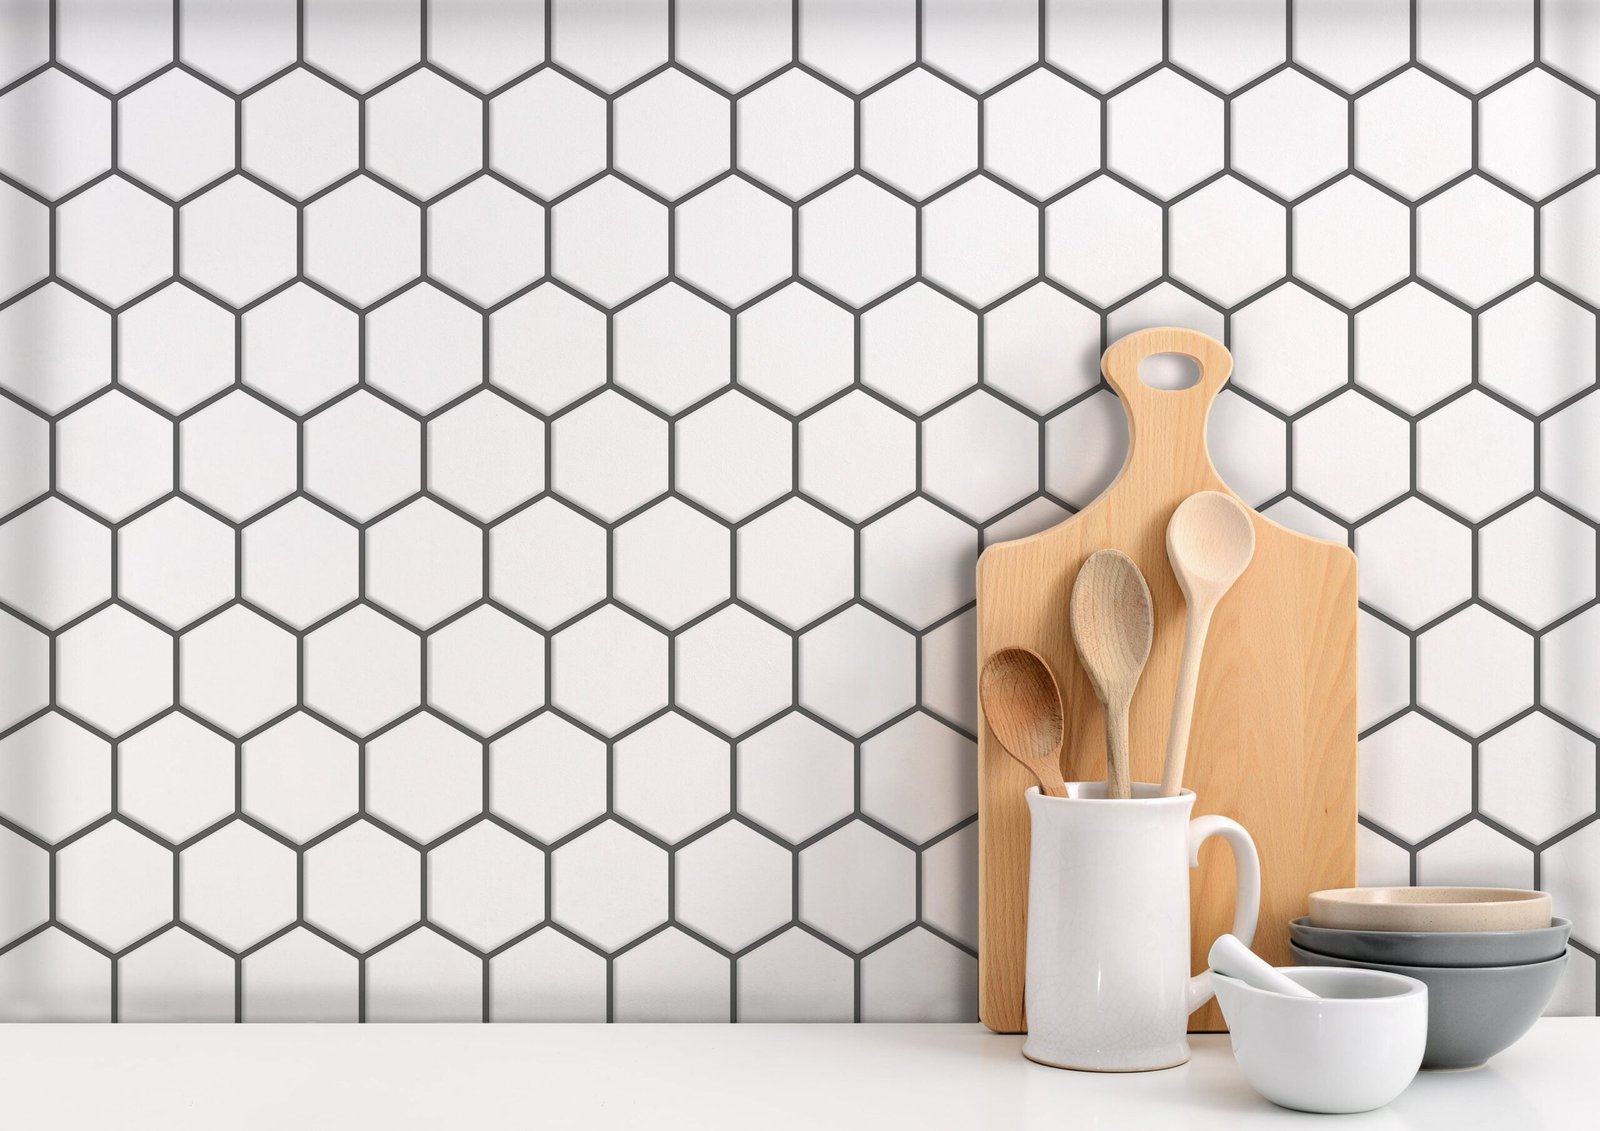 Peel and Stick 3D Tiles White Hexagon Peel and Stick tiles - Mosaicowall Mosaicowall White Hexagon Peel and Stick tiles